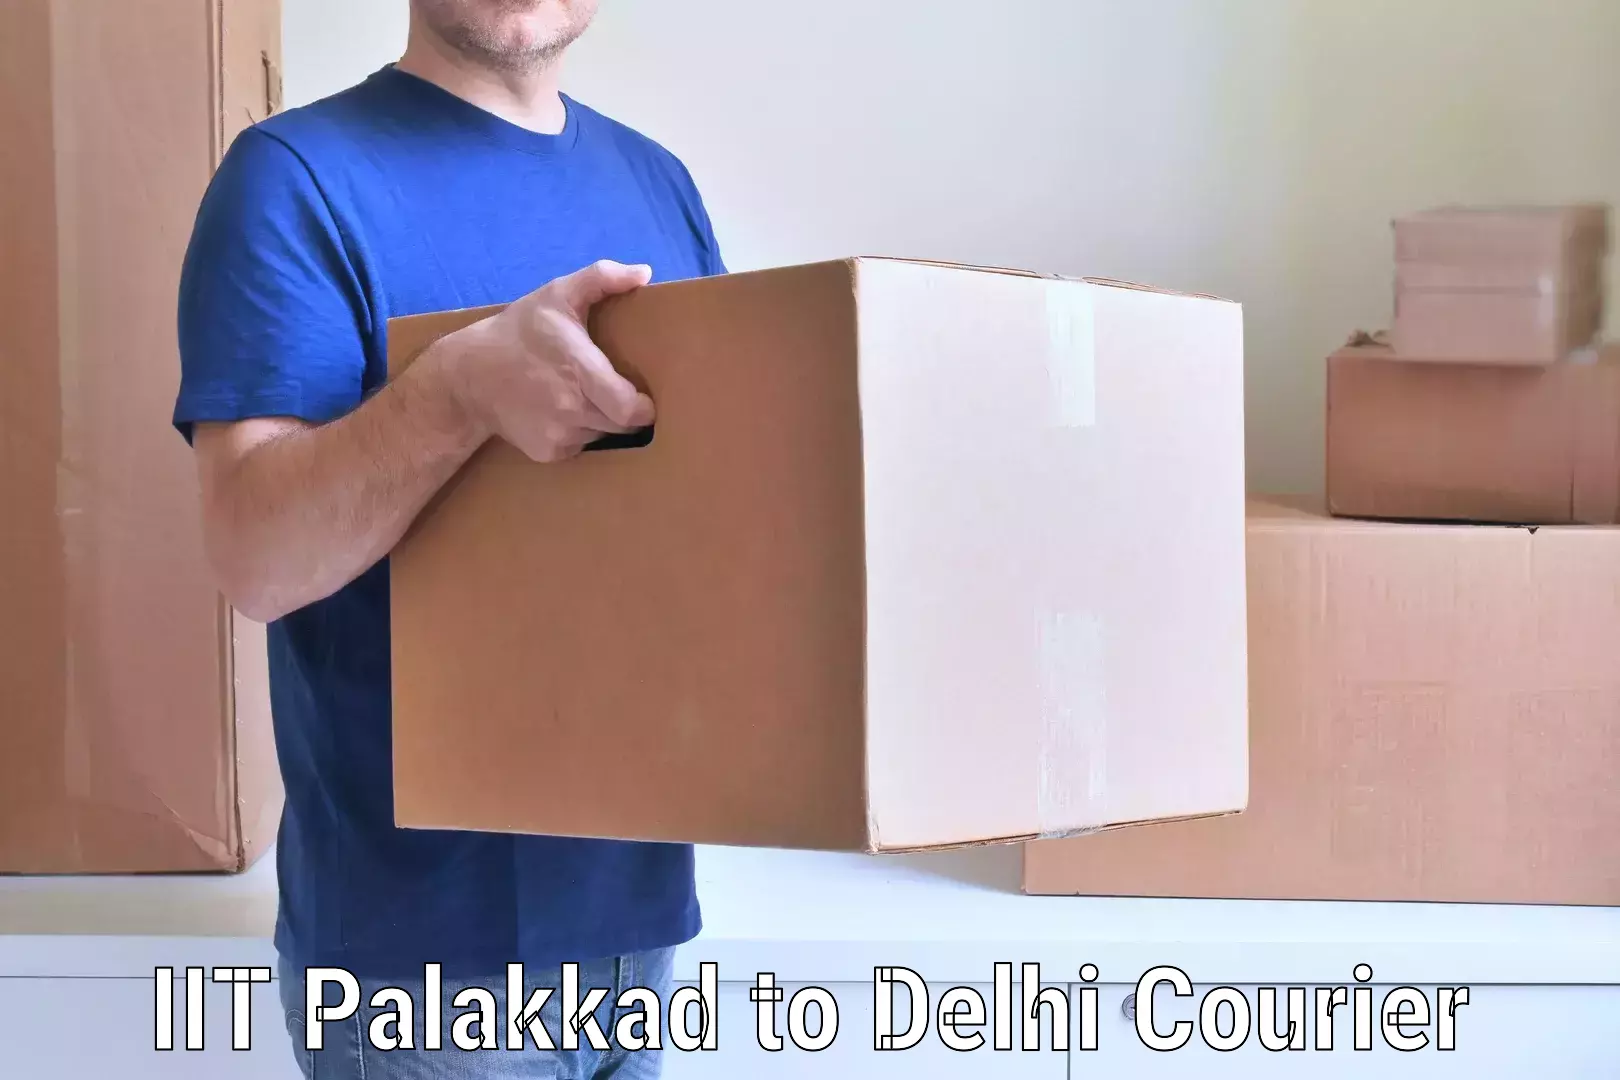 Furniture transport services in IIT Palakkad to Delhi